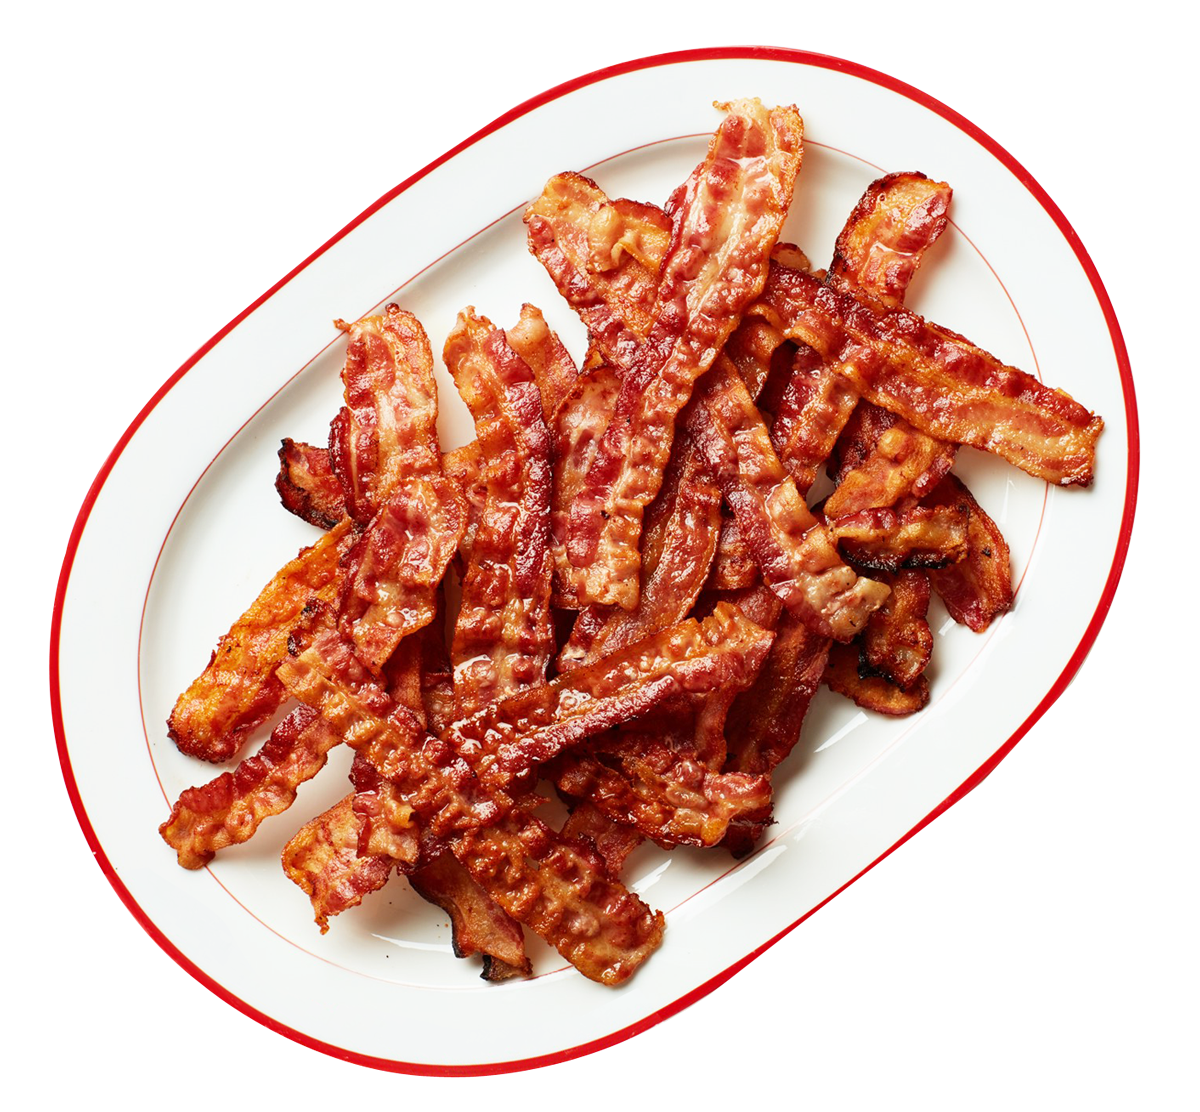 Hdpng - Bacon, Transparent background PNG HD thumbnail